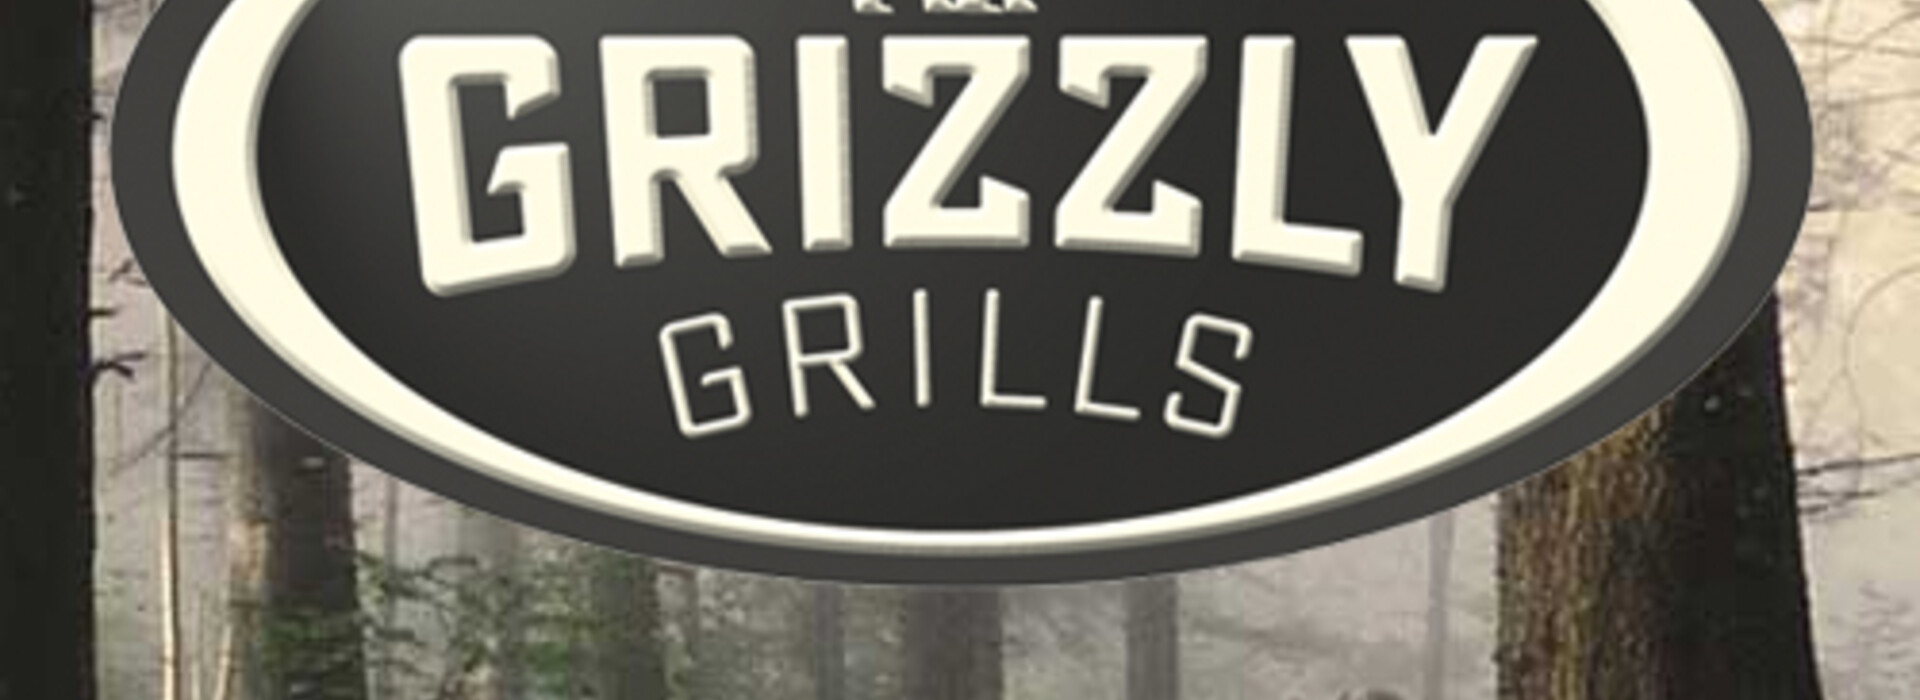 Grizzly-grills